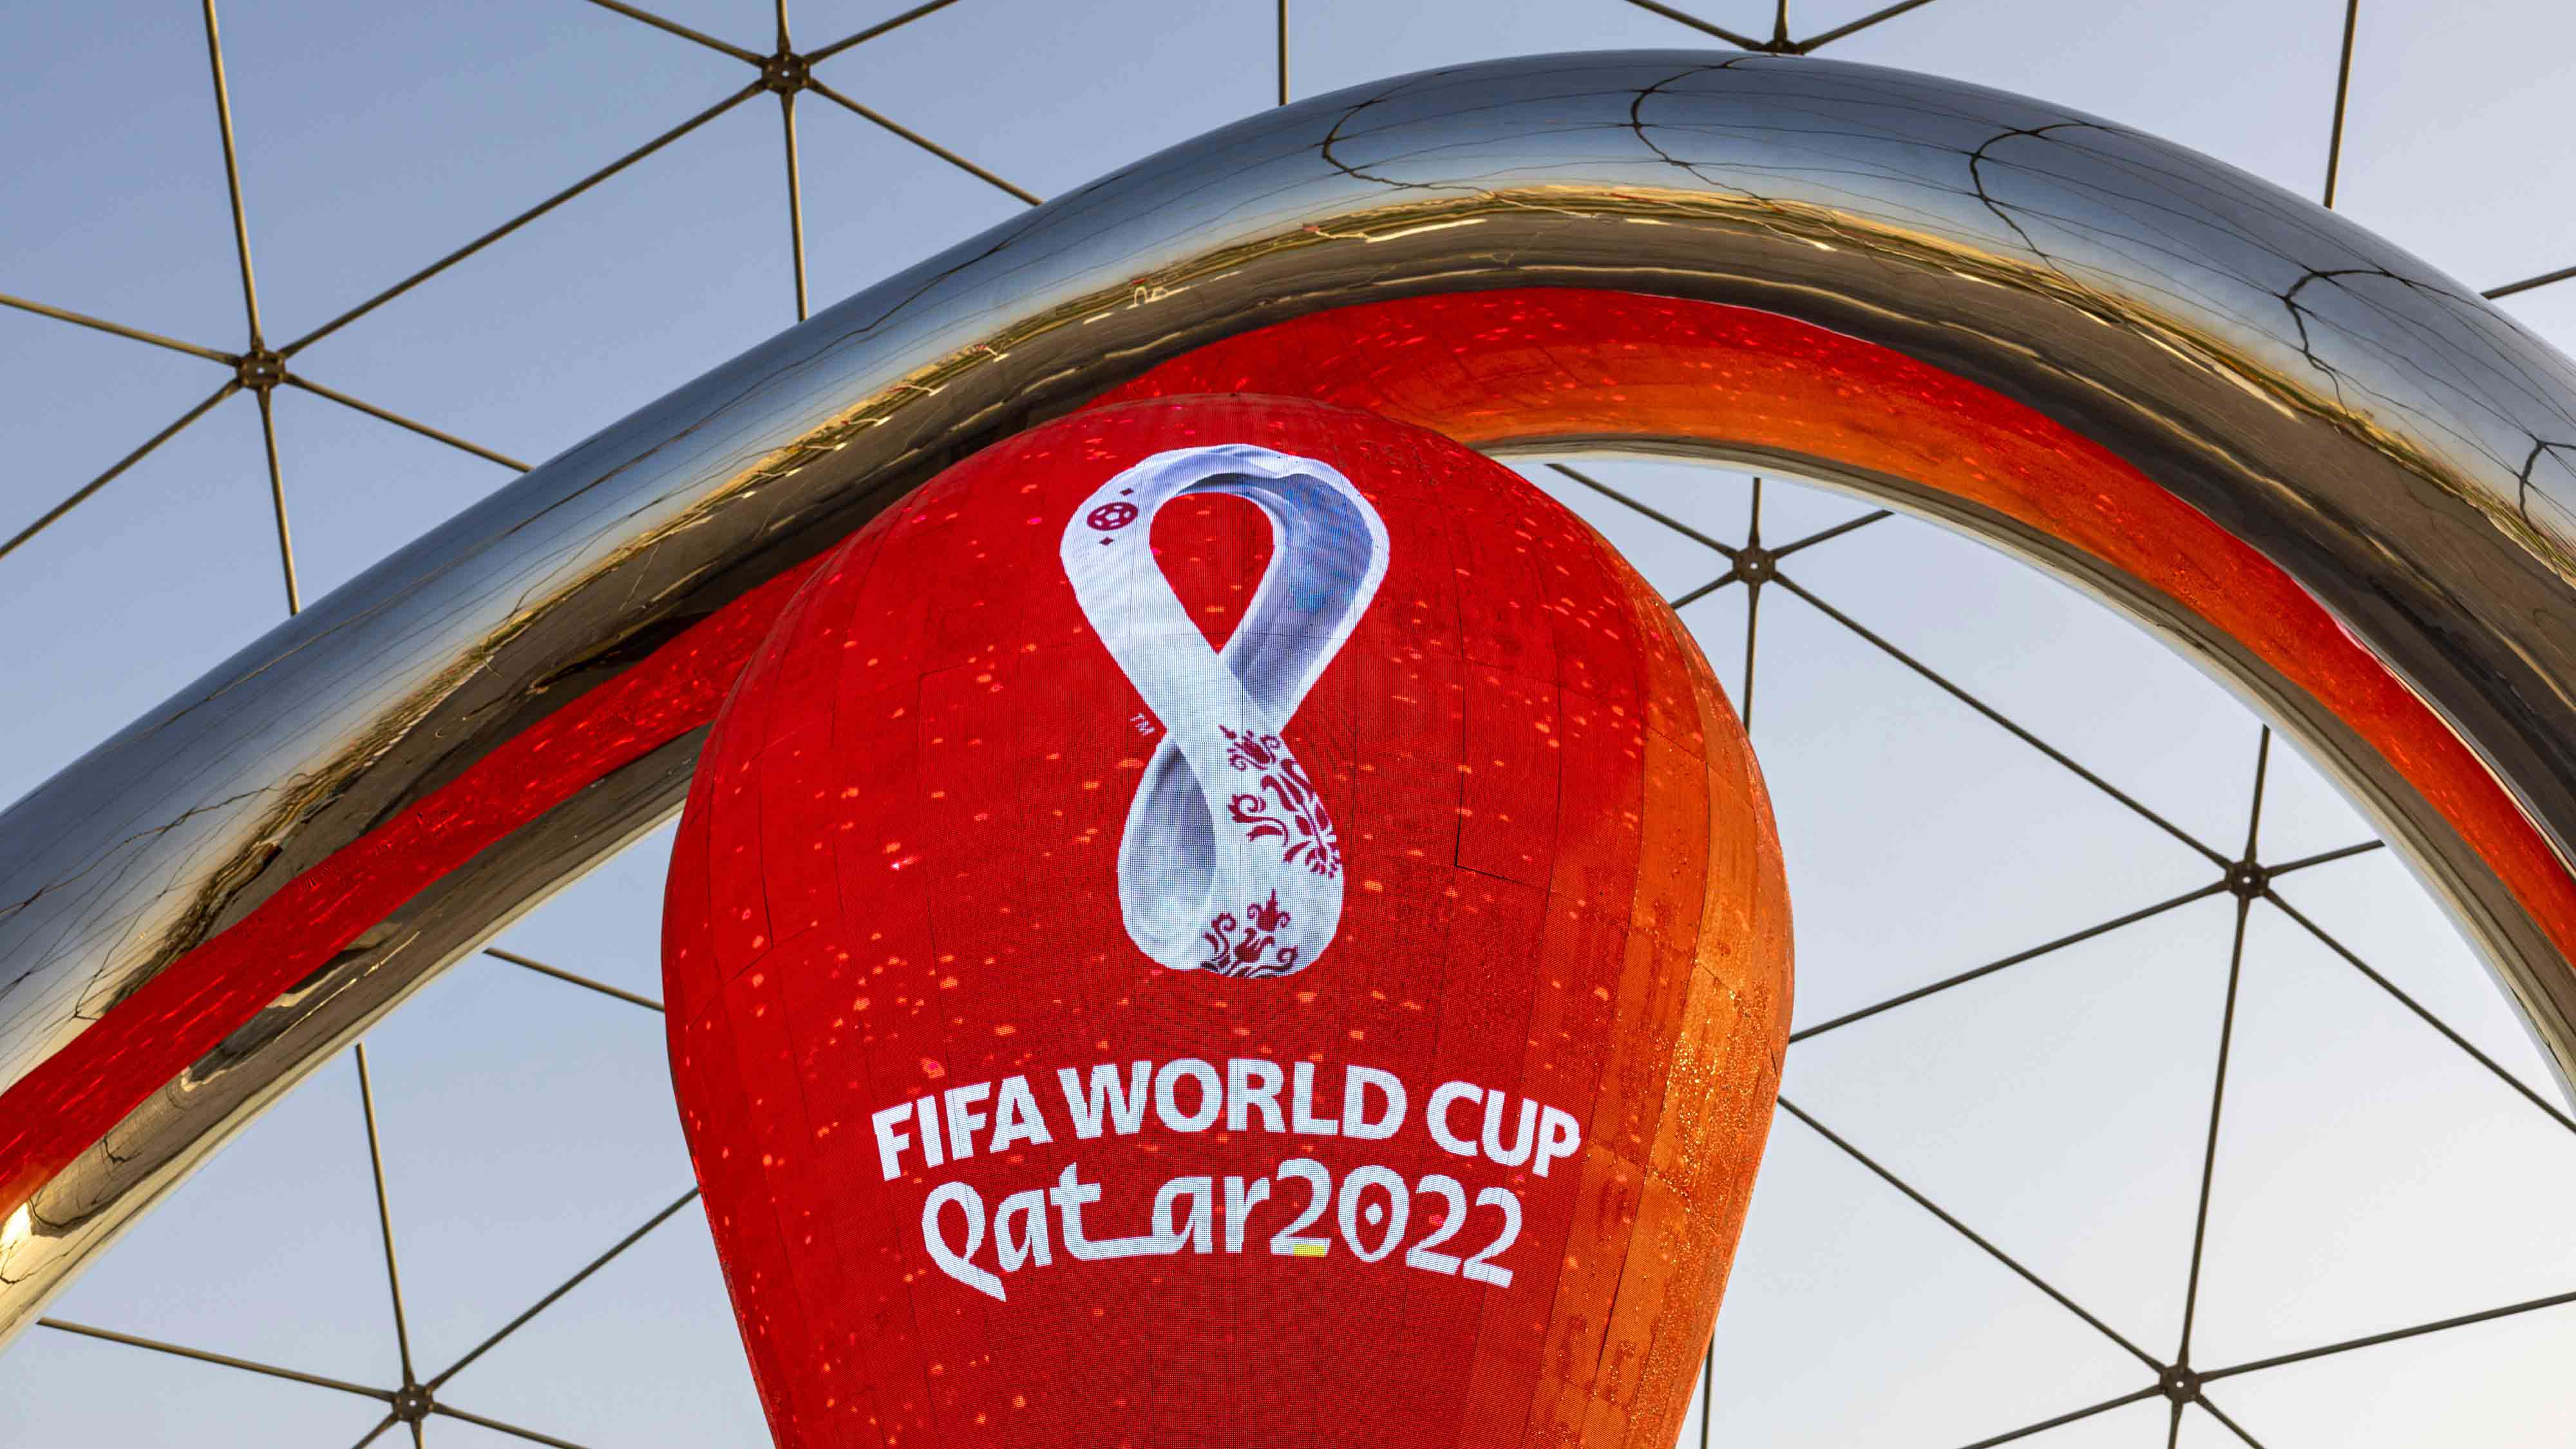 FIFA, World Cup Organizers Agree to Serve Alcoholic Beer at Stadiums in Qatar